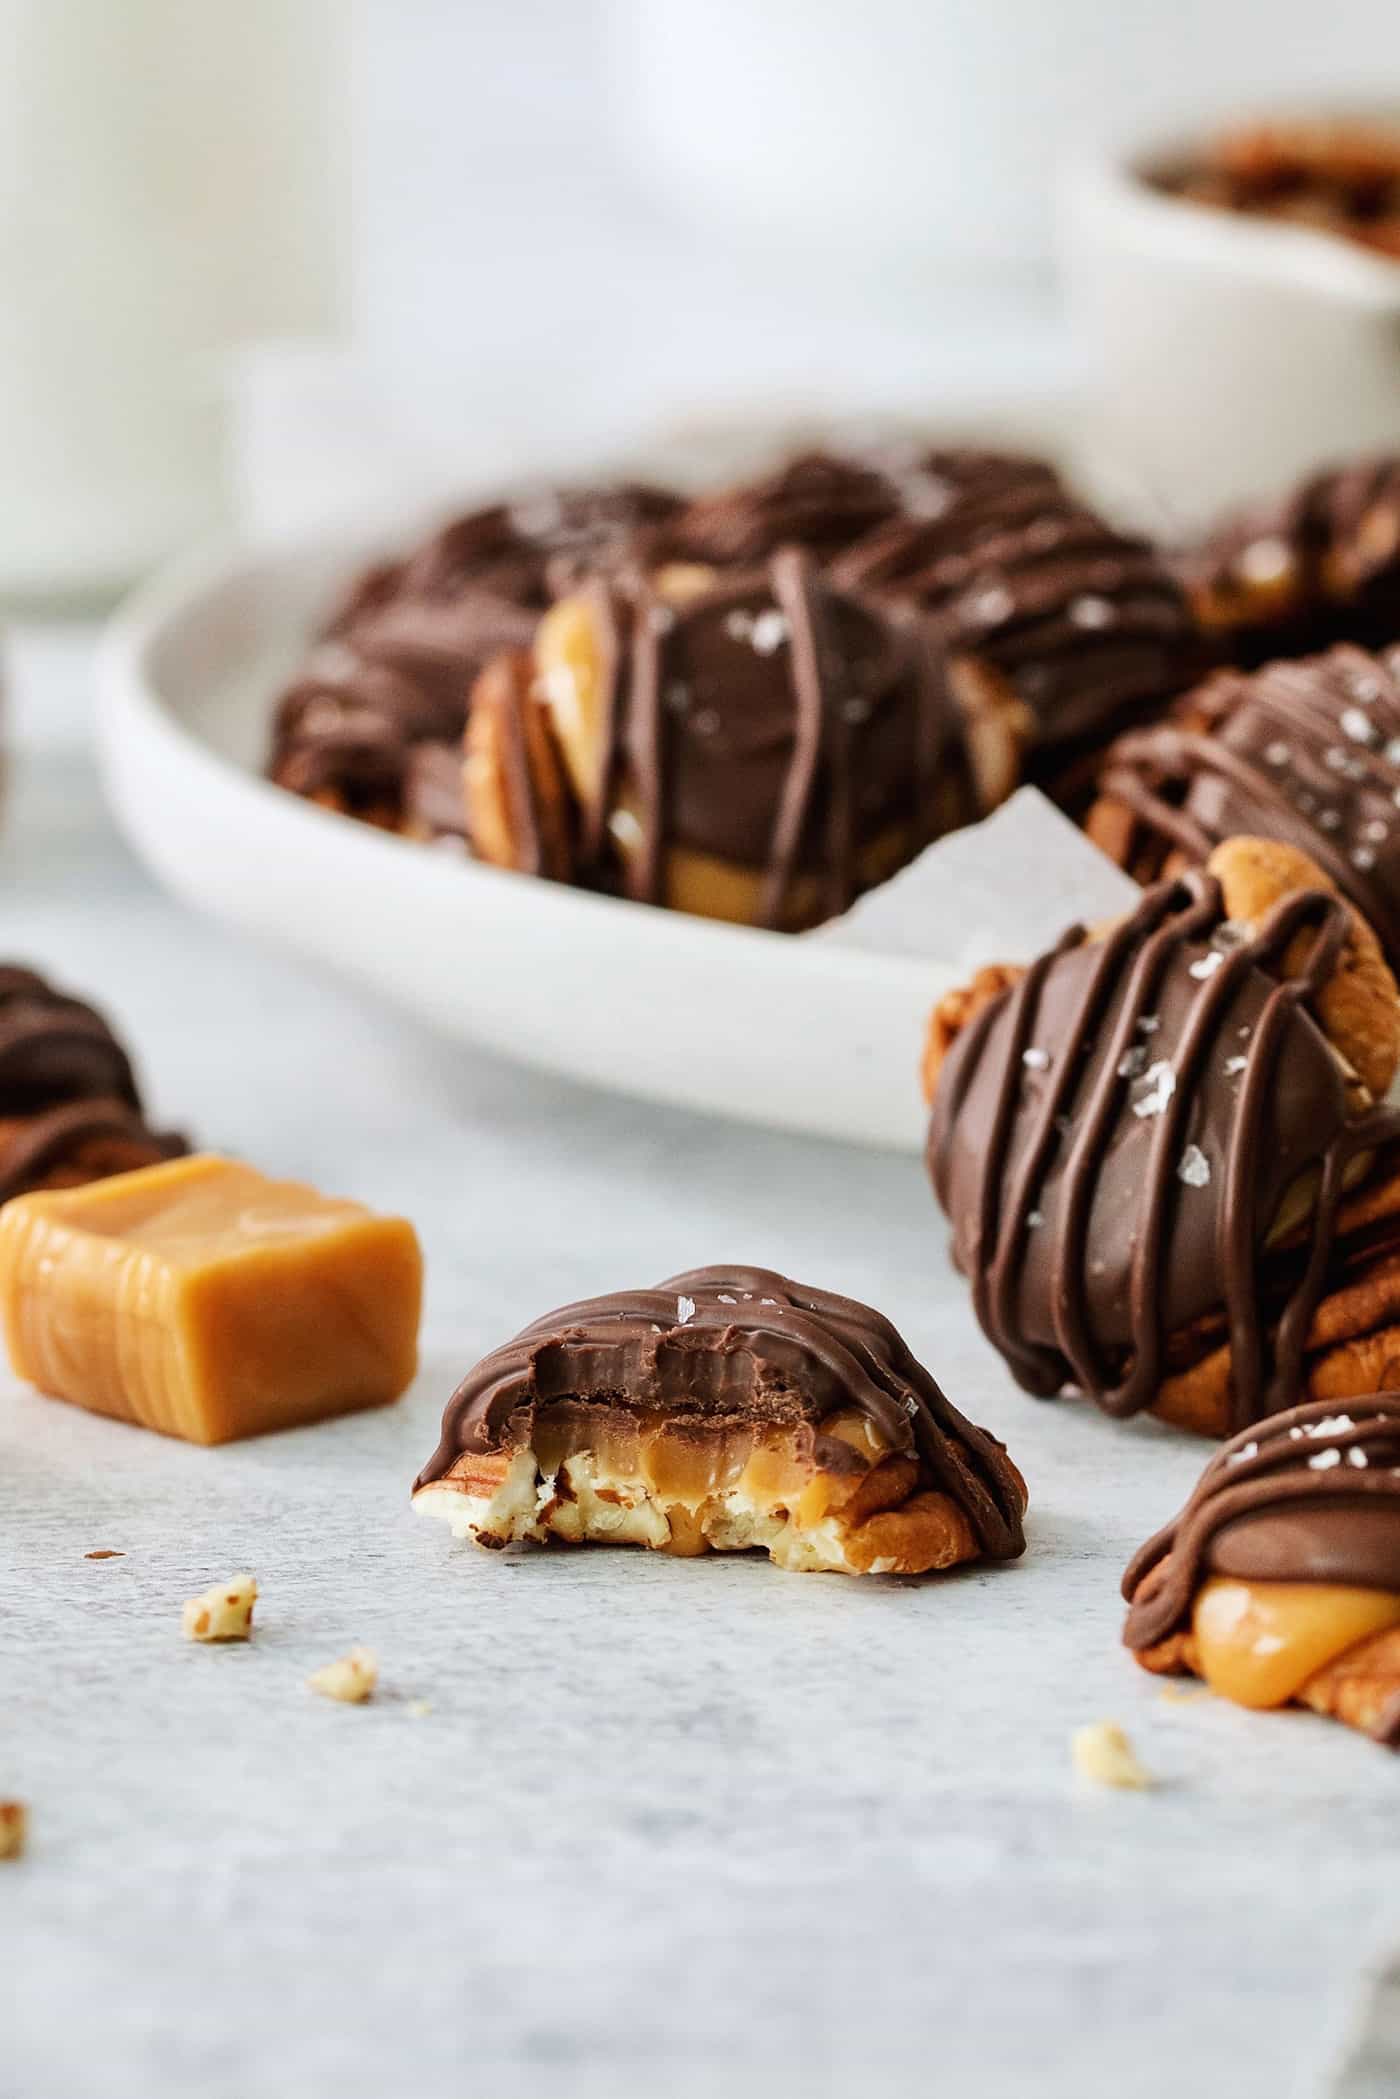 A chocolate turtle candy is shown with a bite taken out, with a bowl of chocolate turtles in the background and nuts and a caramel next to it.